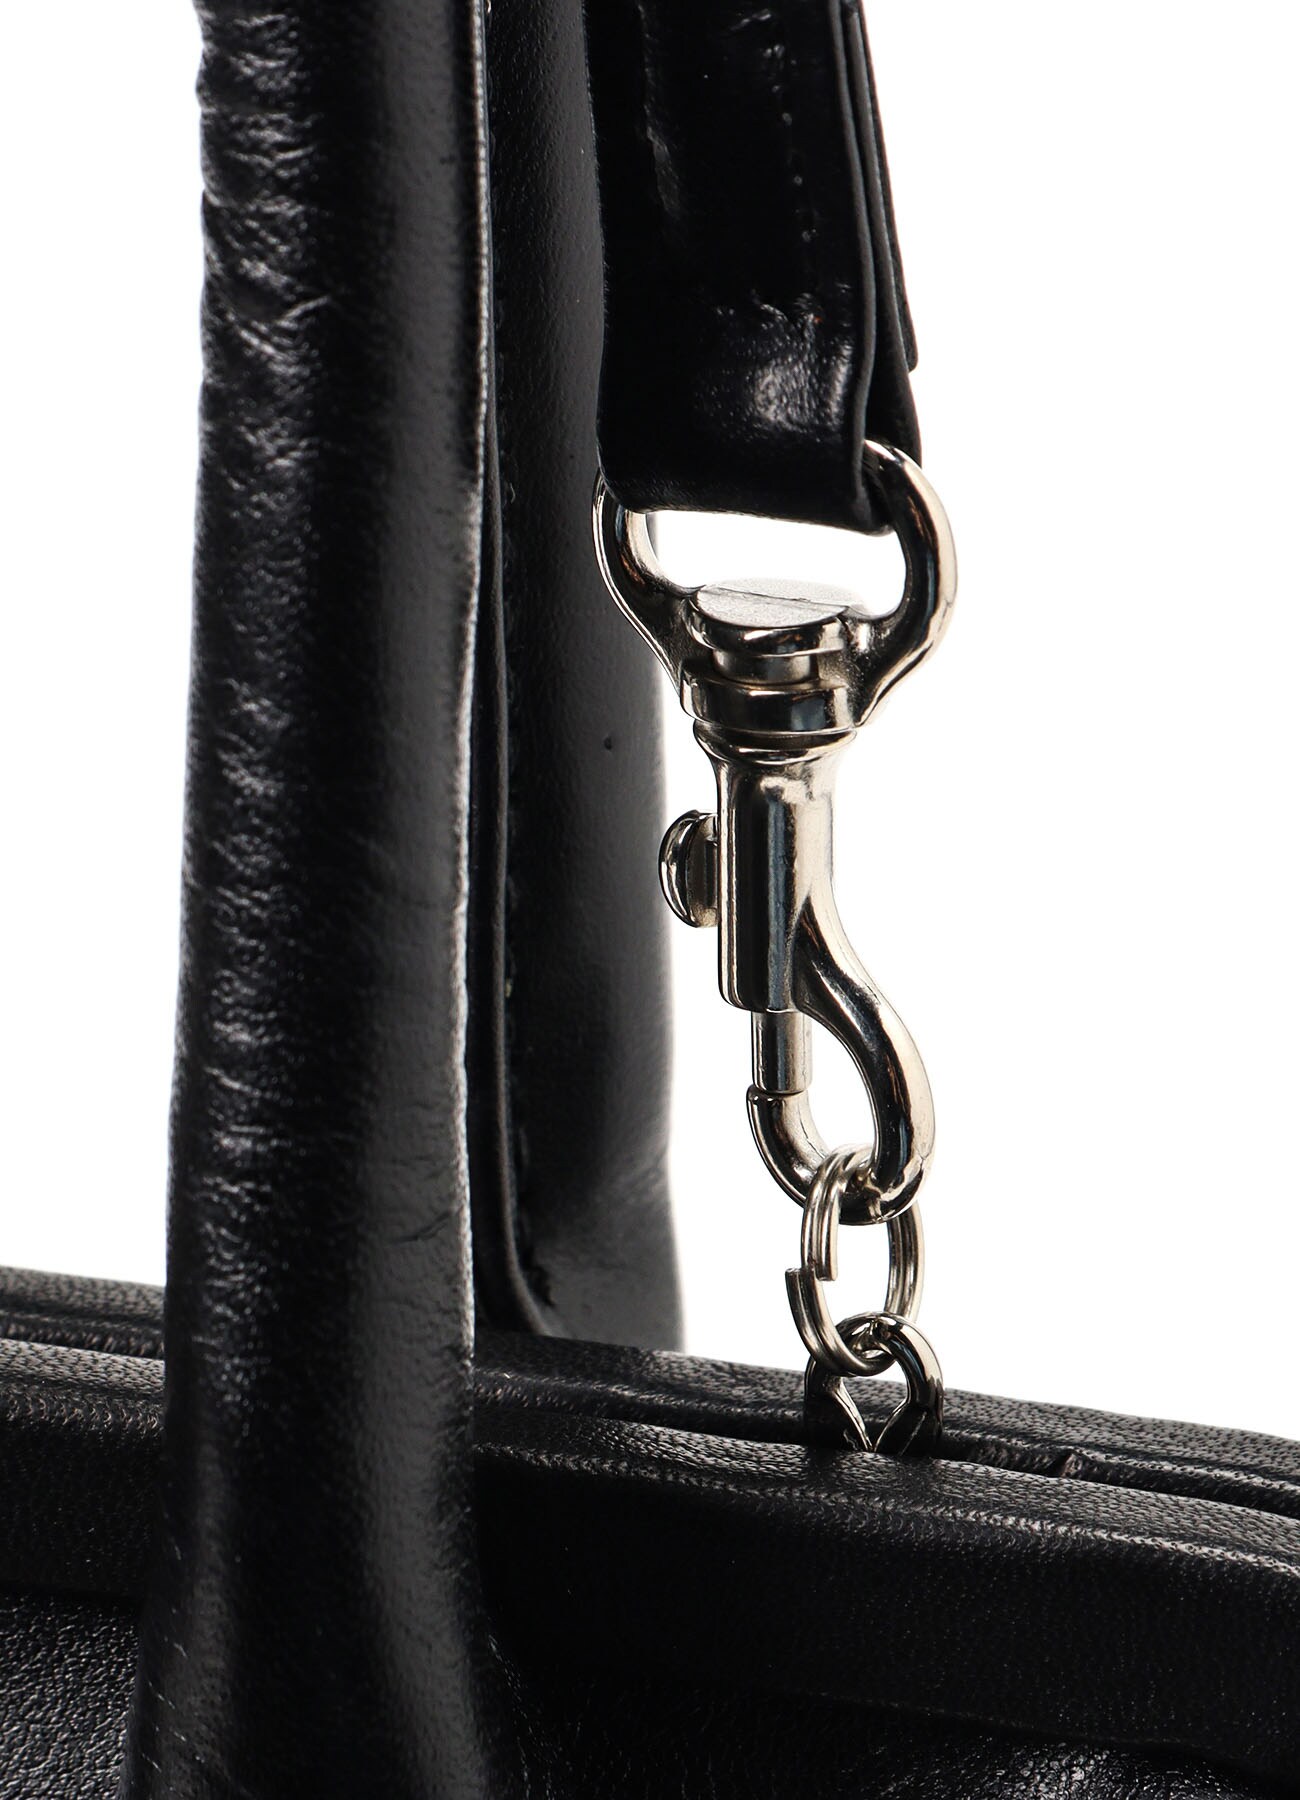 【7/26 12:00(JTS) Release】SEMI-GLOSS LEATHER3D BIG BAG W/ CLASP